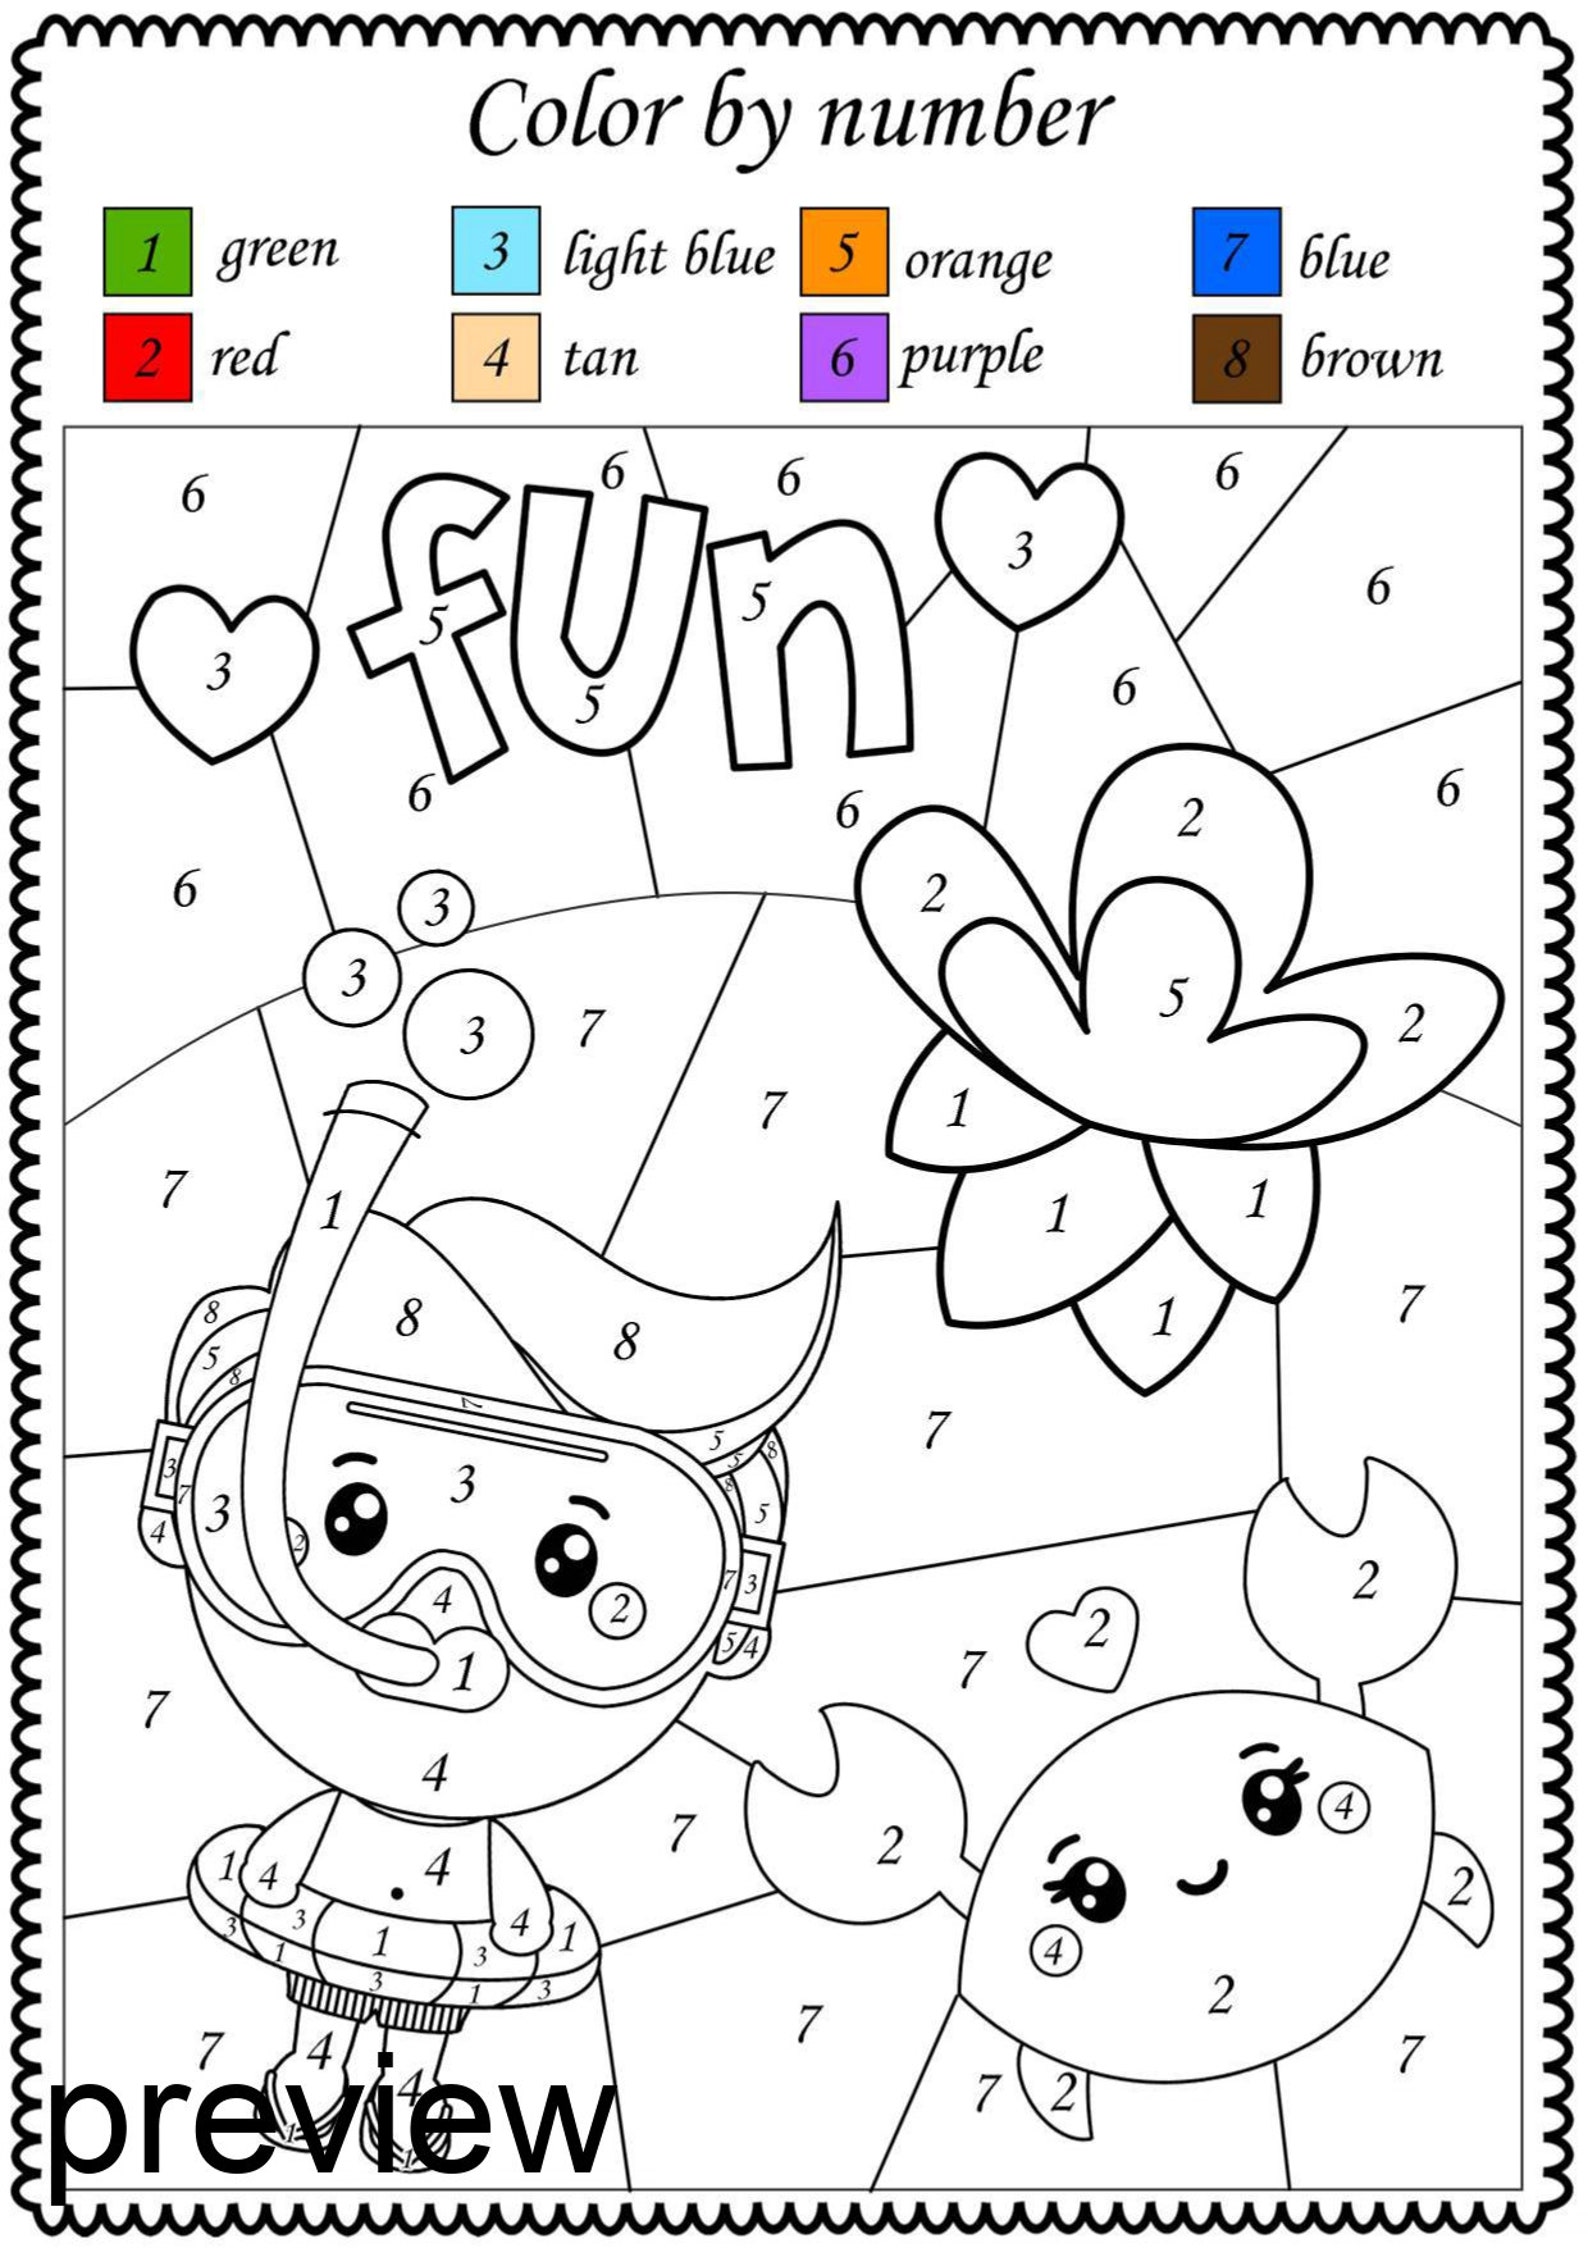 color-by-numbers-printable-coloring-pages